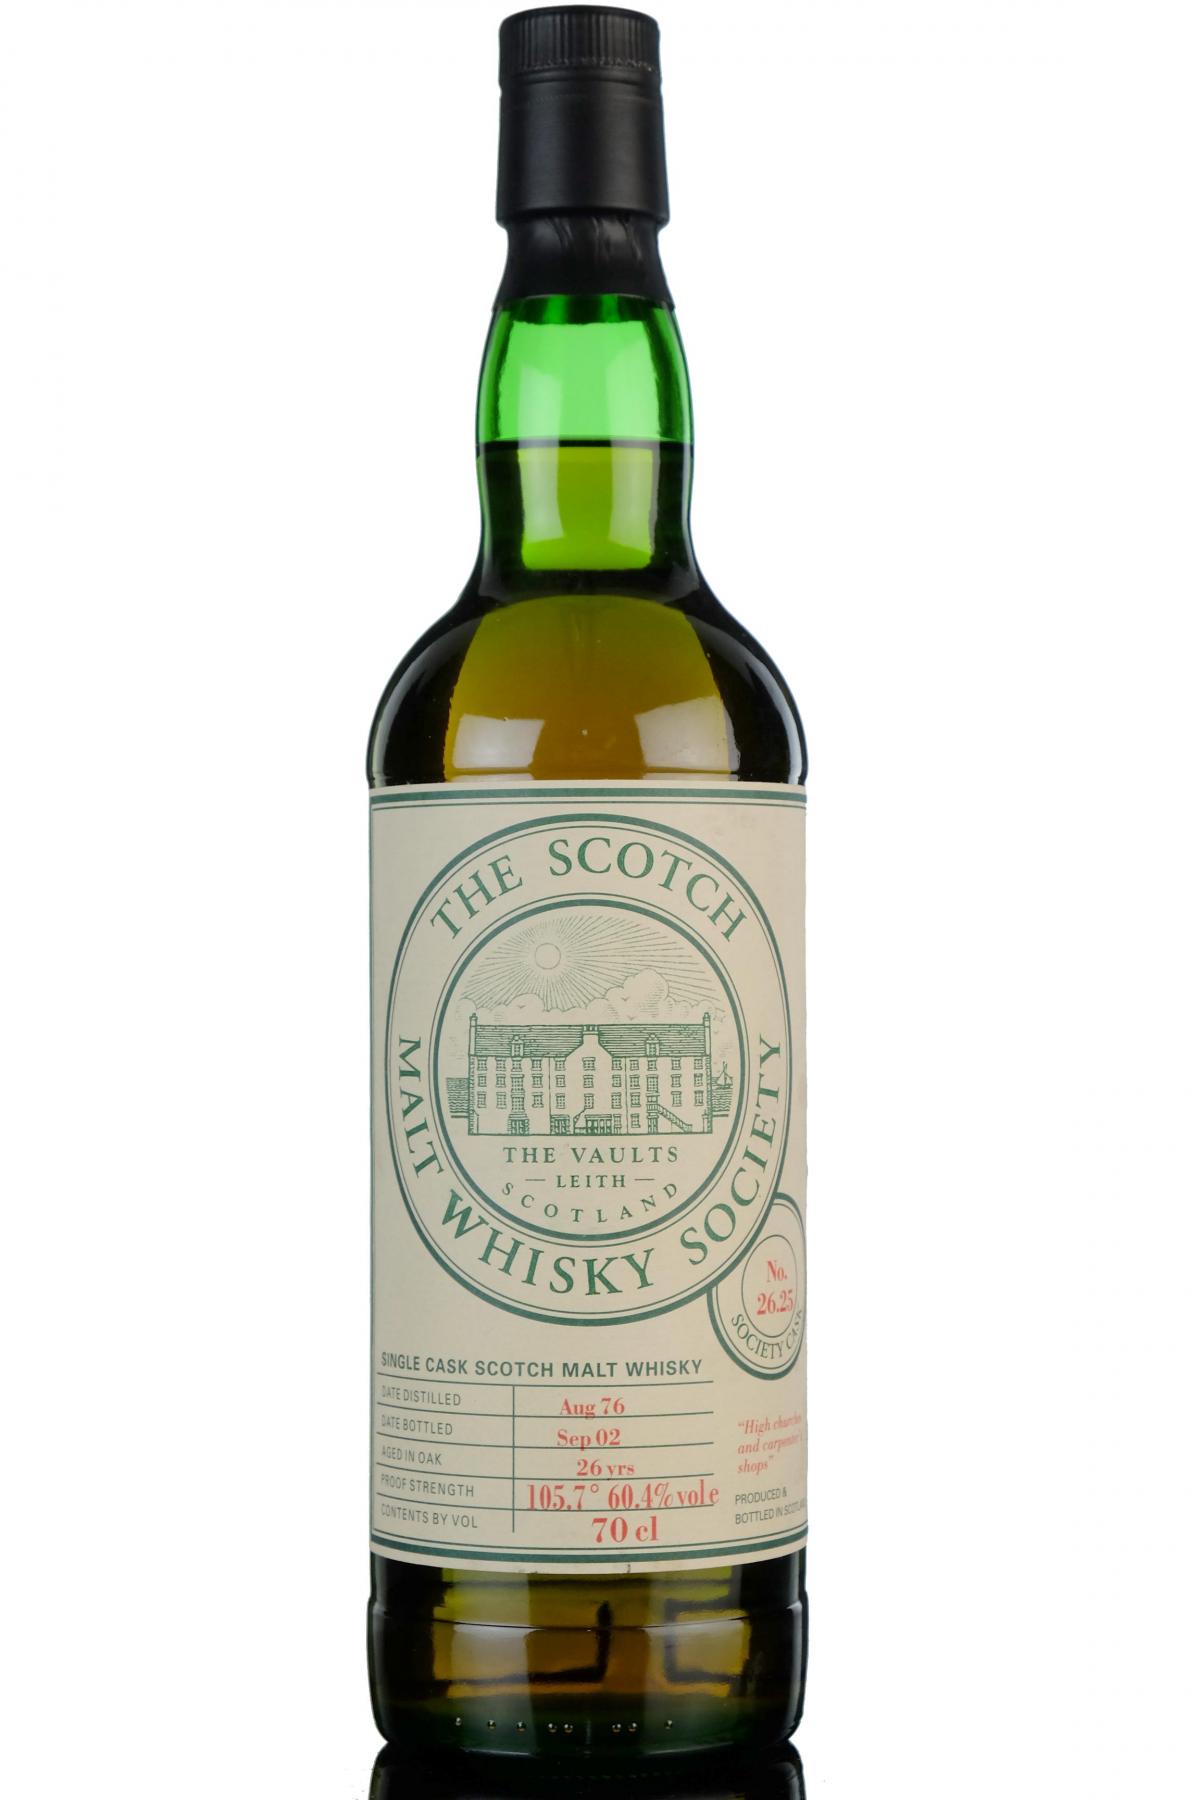 Clynelish 1976-2002 - 26 Year Old - SMWS 26.25